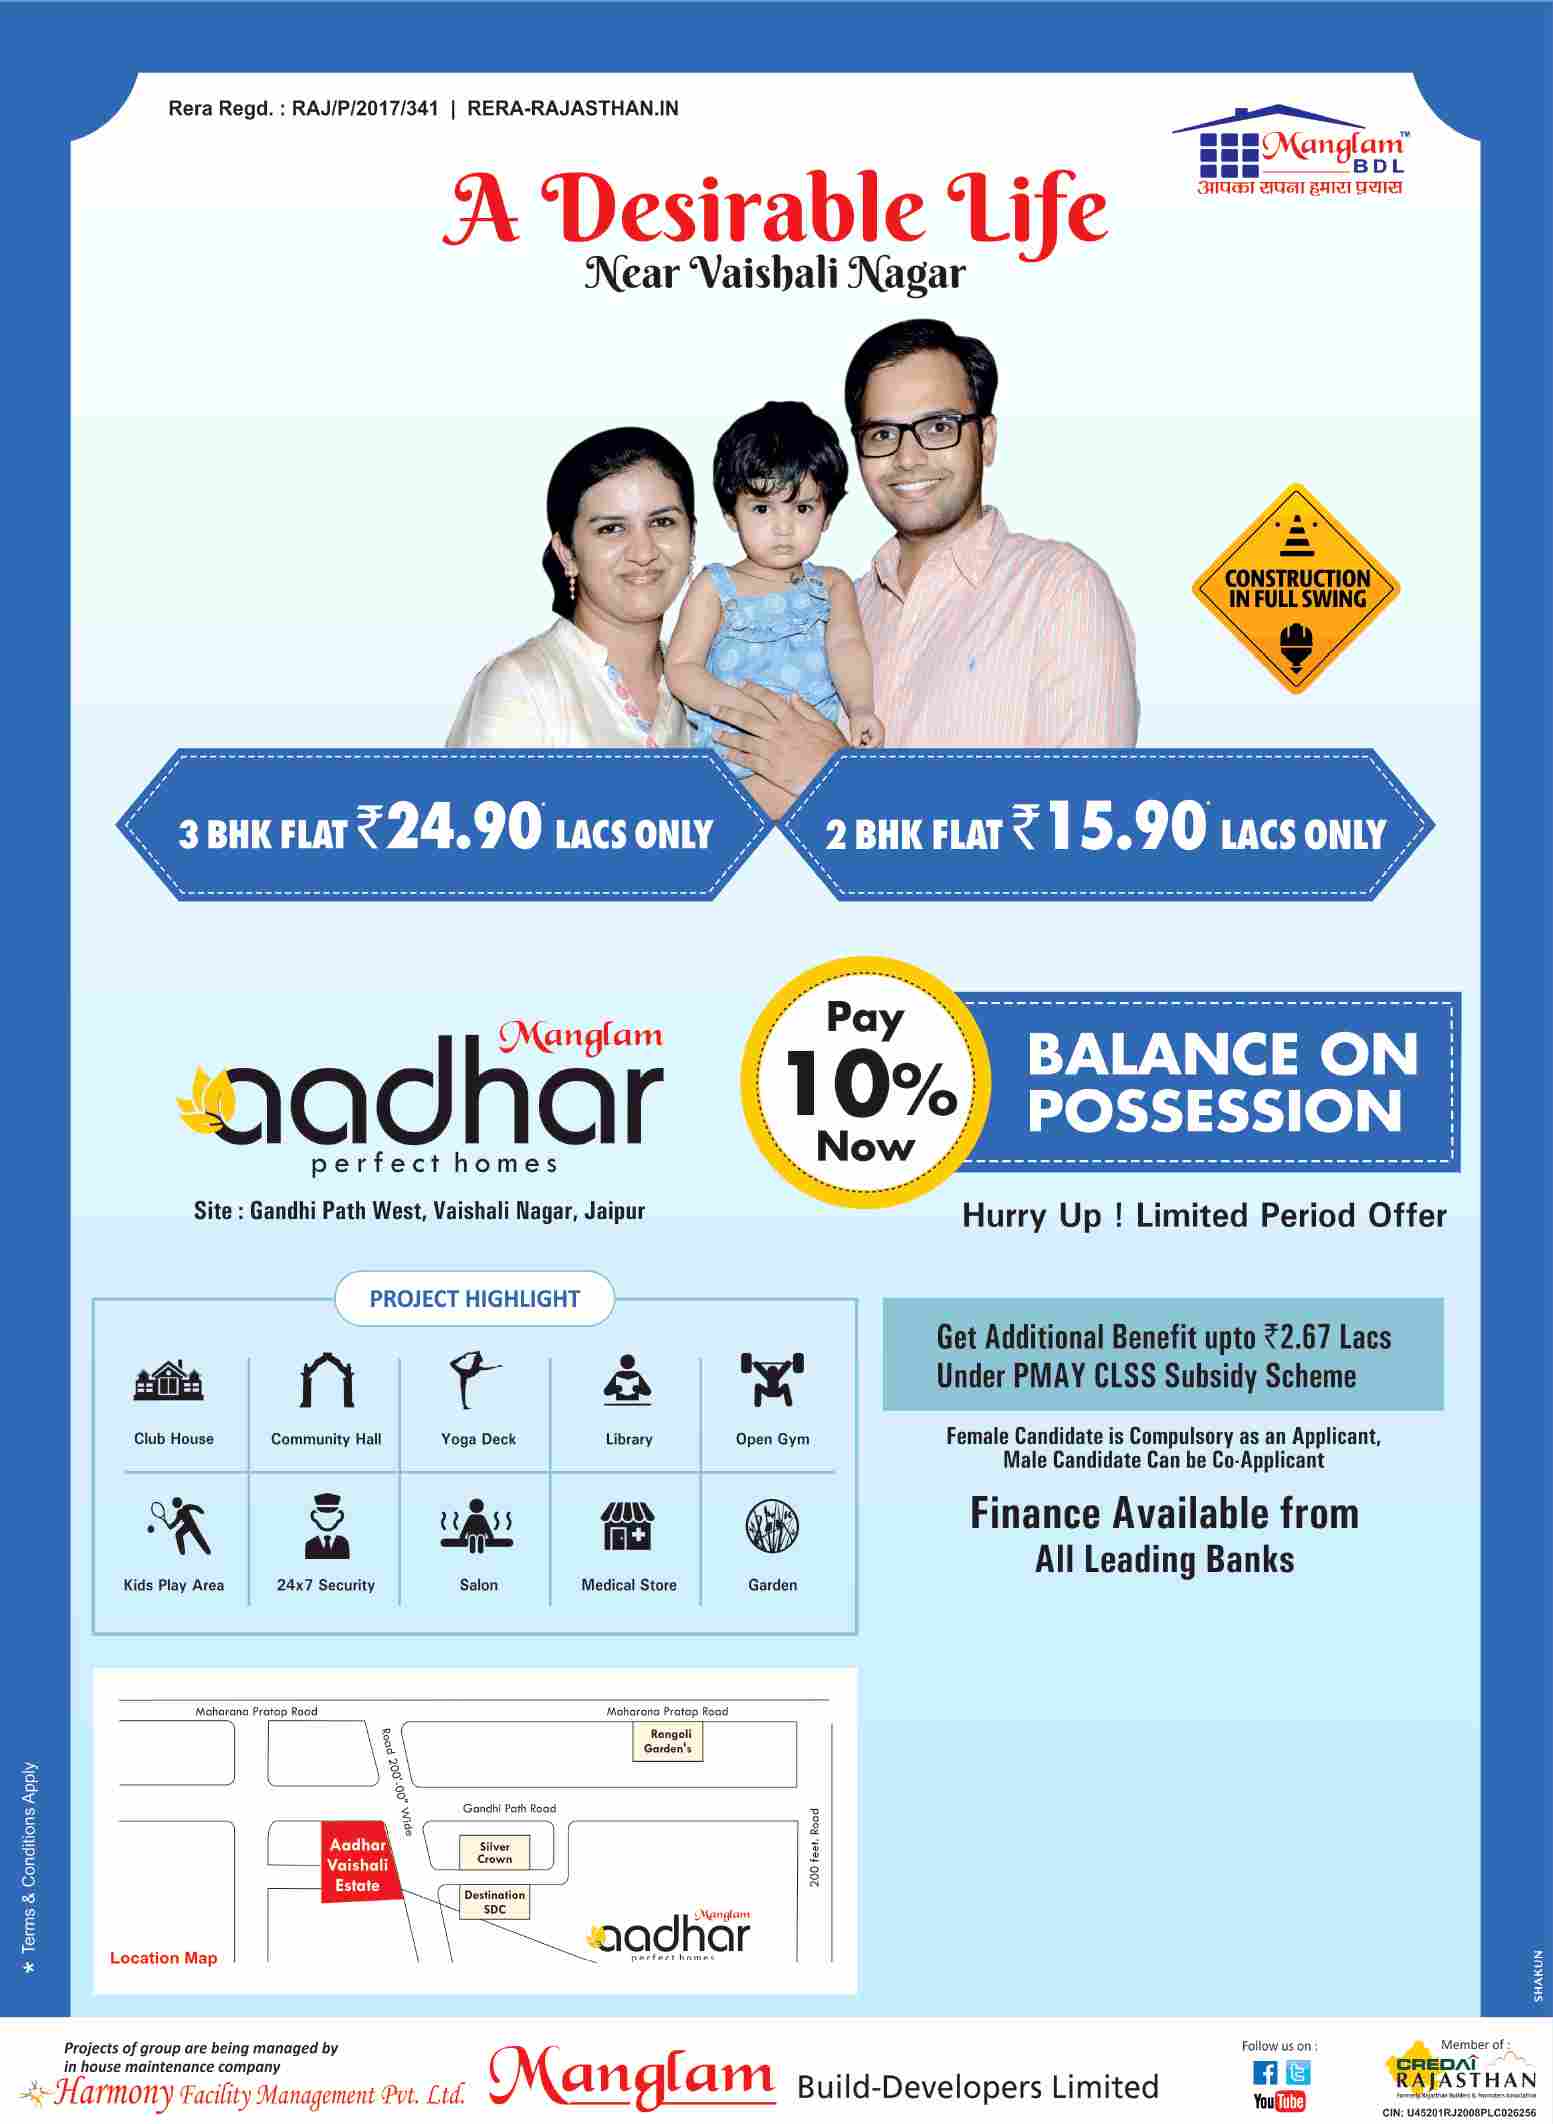 Pay 10% now and balance on possession at Mangalam Aadhar in Jaipur Update